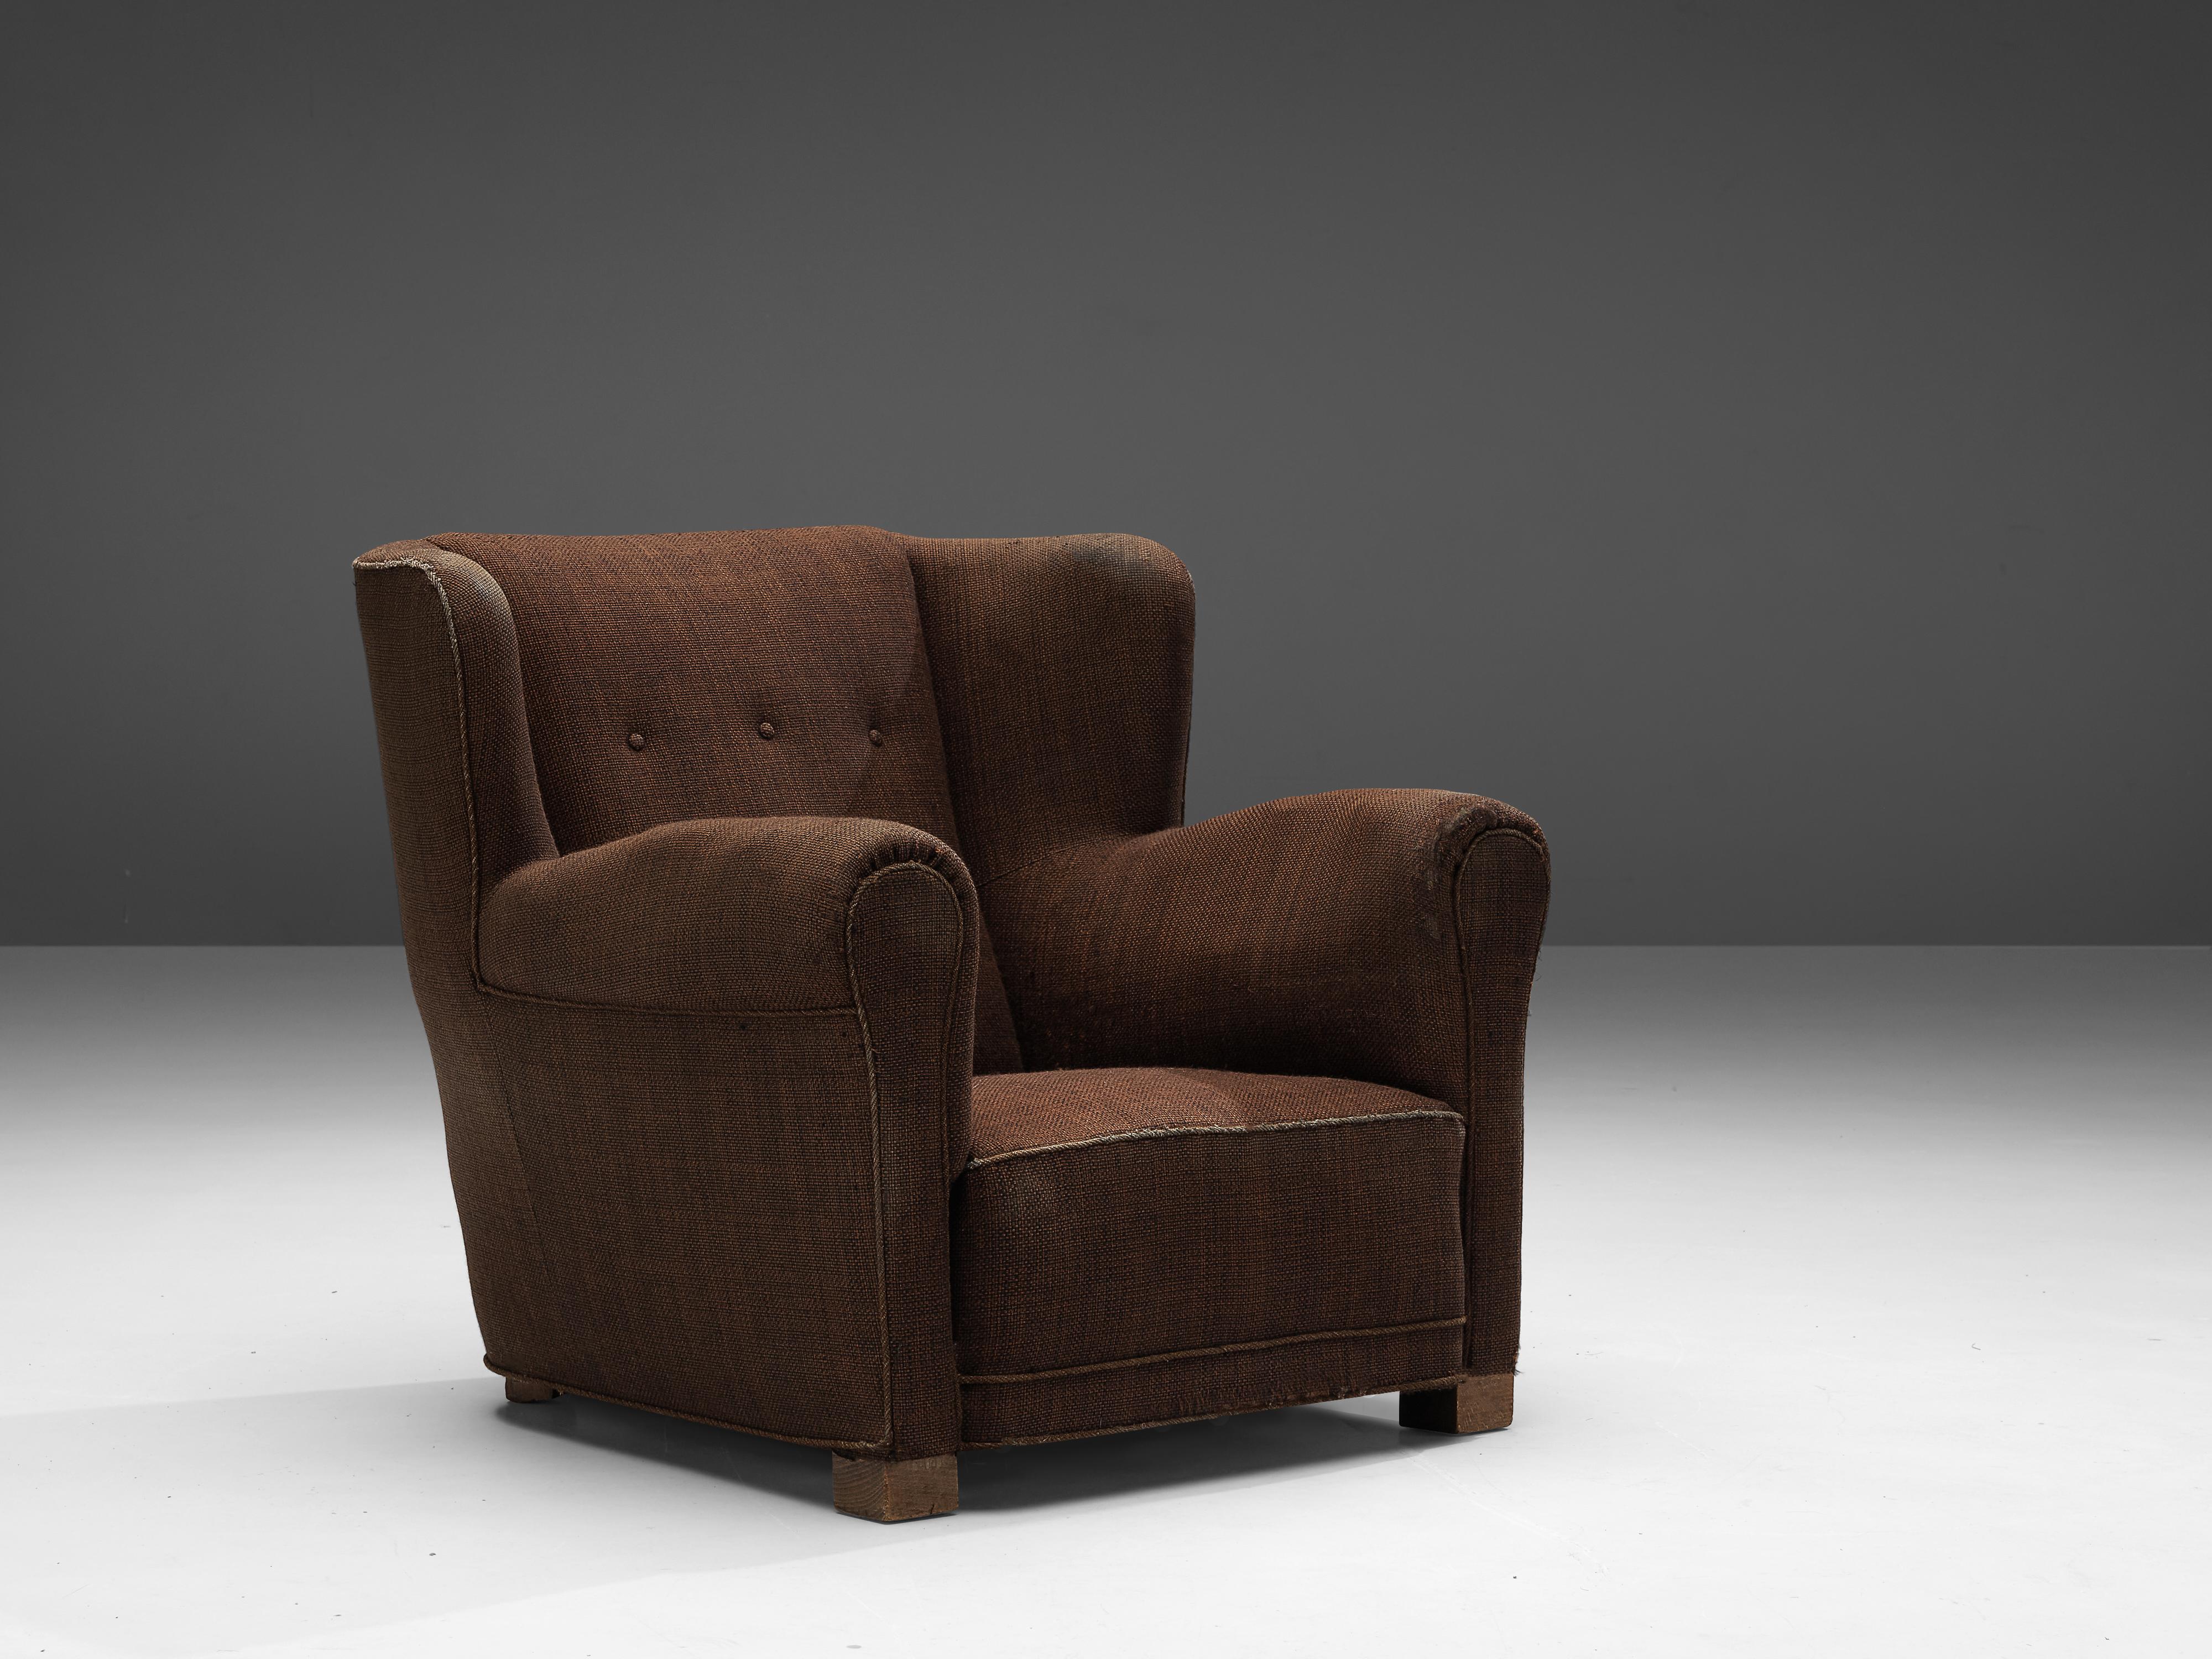 Easy chair, wood, fabric, Denmark, 1950s

This bulky armchair features a sturdy yet inviting look. The wide seat with armrests and the backrest with wings, create a comfortable experience for the sitter. From the back, the chair has a surprisingly